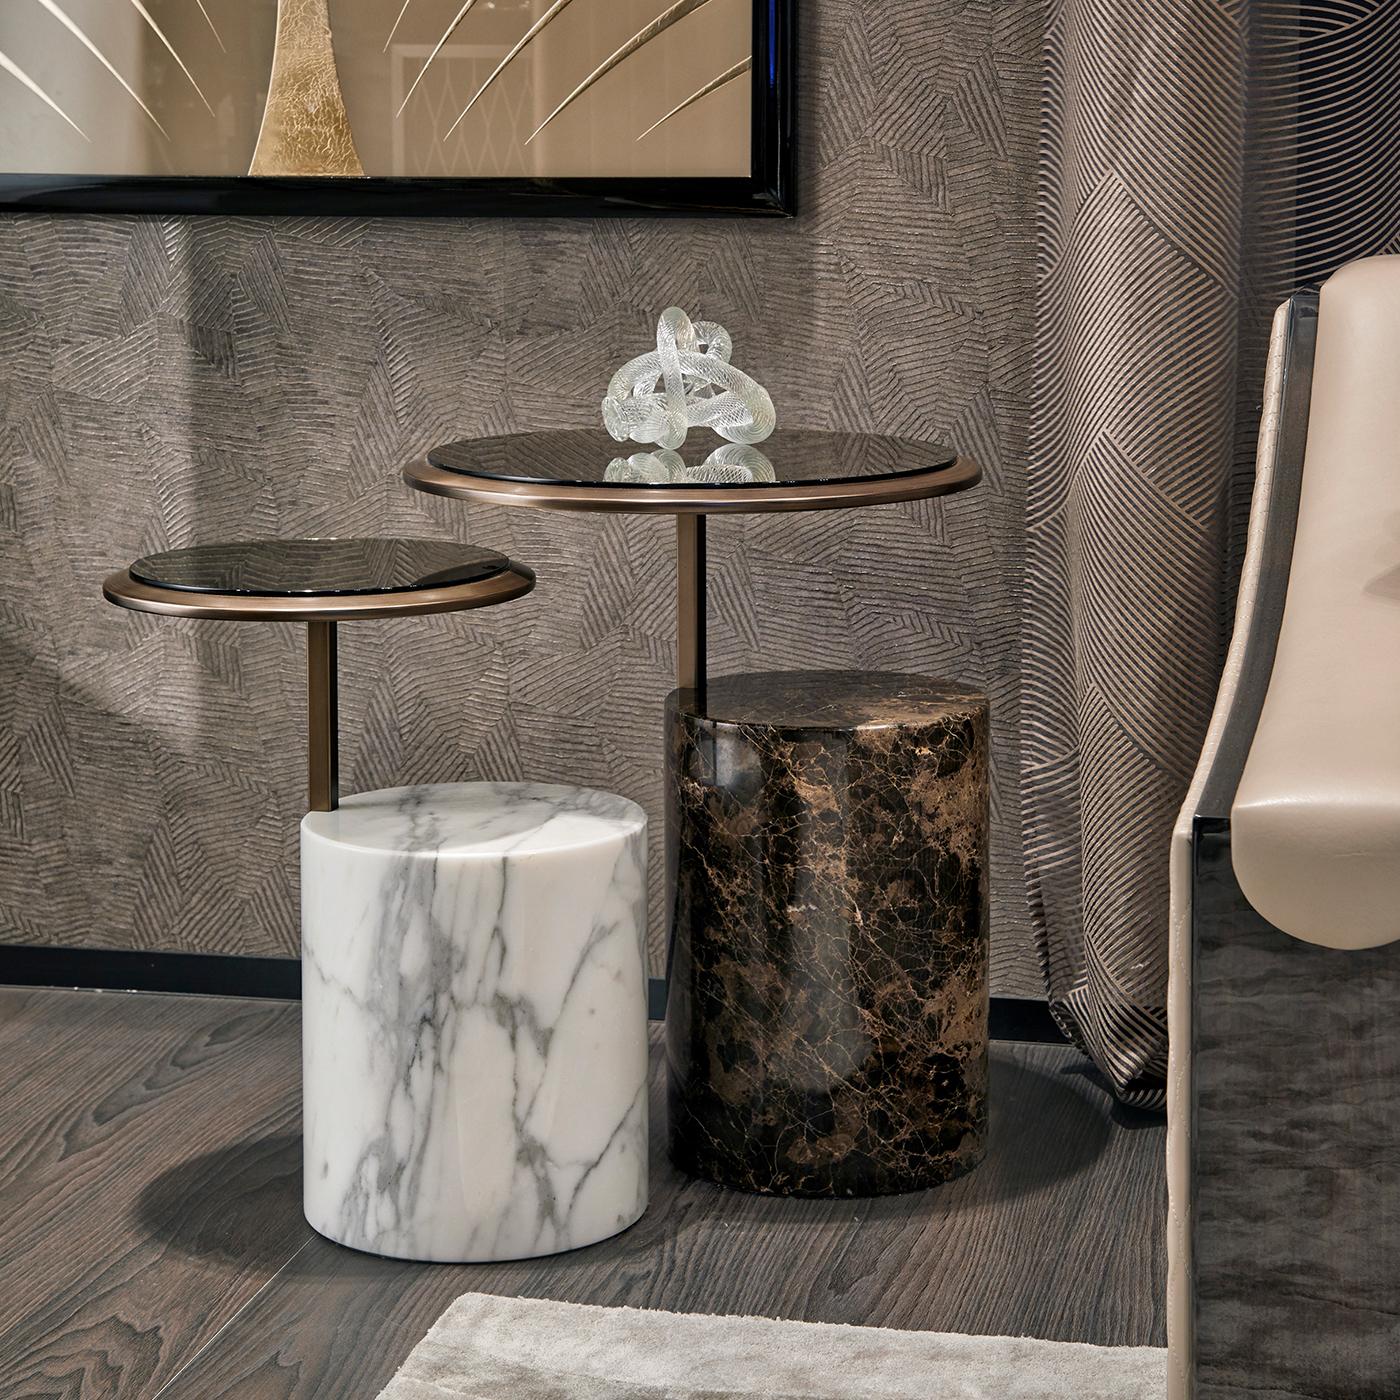 A mesmerizing interplay of hues and clean shapes, this stunning coffee table is composed of a cylindrical brown marble base, and a large round MDF top rising on a sturdy vertical top. Enhanced with charming natural veining, the marble vase elegantly